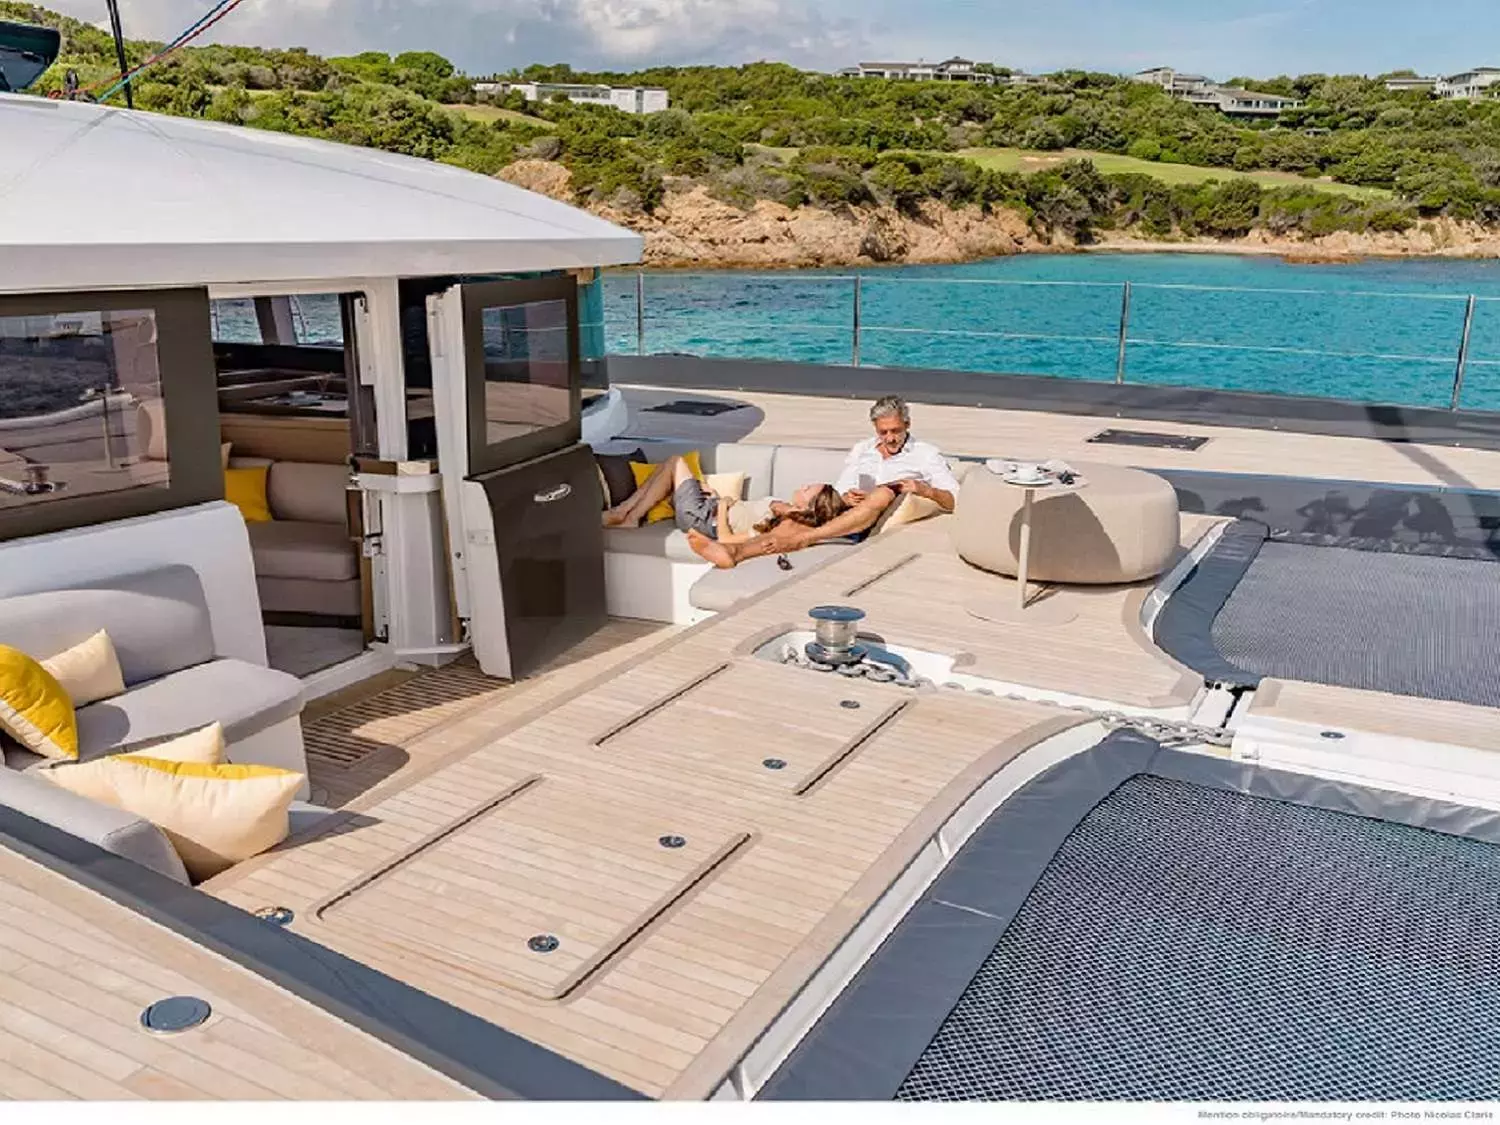 Kajikia by Lagoon - Special Offer for a private Luxury Catamaran Charter in Corsica with a crew